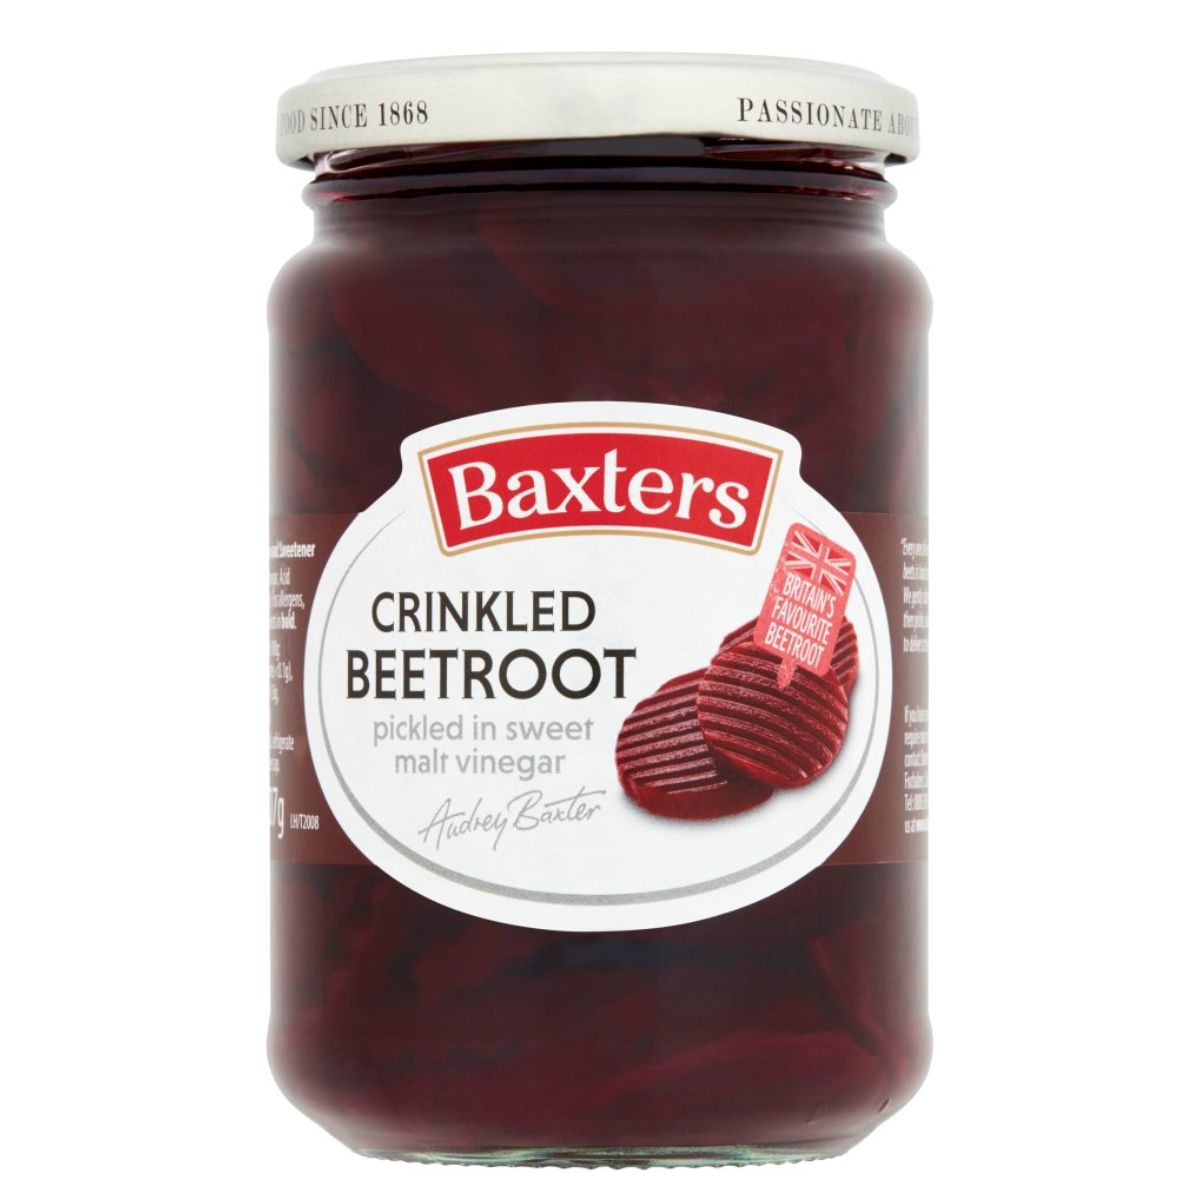 A jar of Baxters - Crinkled Beetroot - 340g, pickled in sweet malt vinegar. The label shows an image of the beetroot slices with their distinctive crinkled texture and mentions "produced by Audrey Baxter.